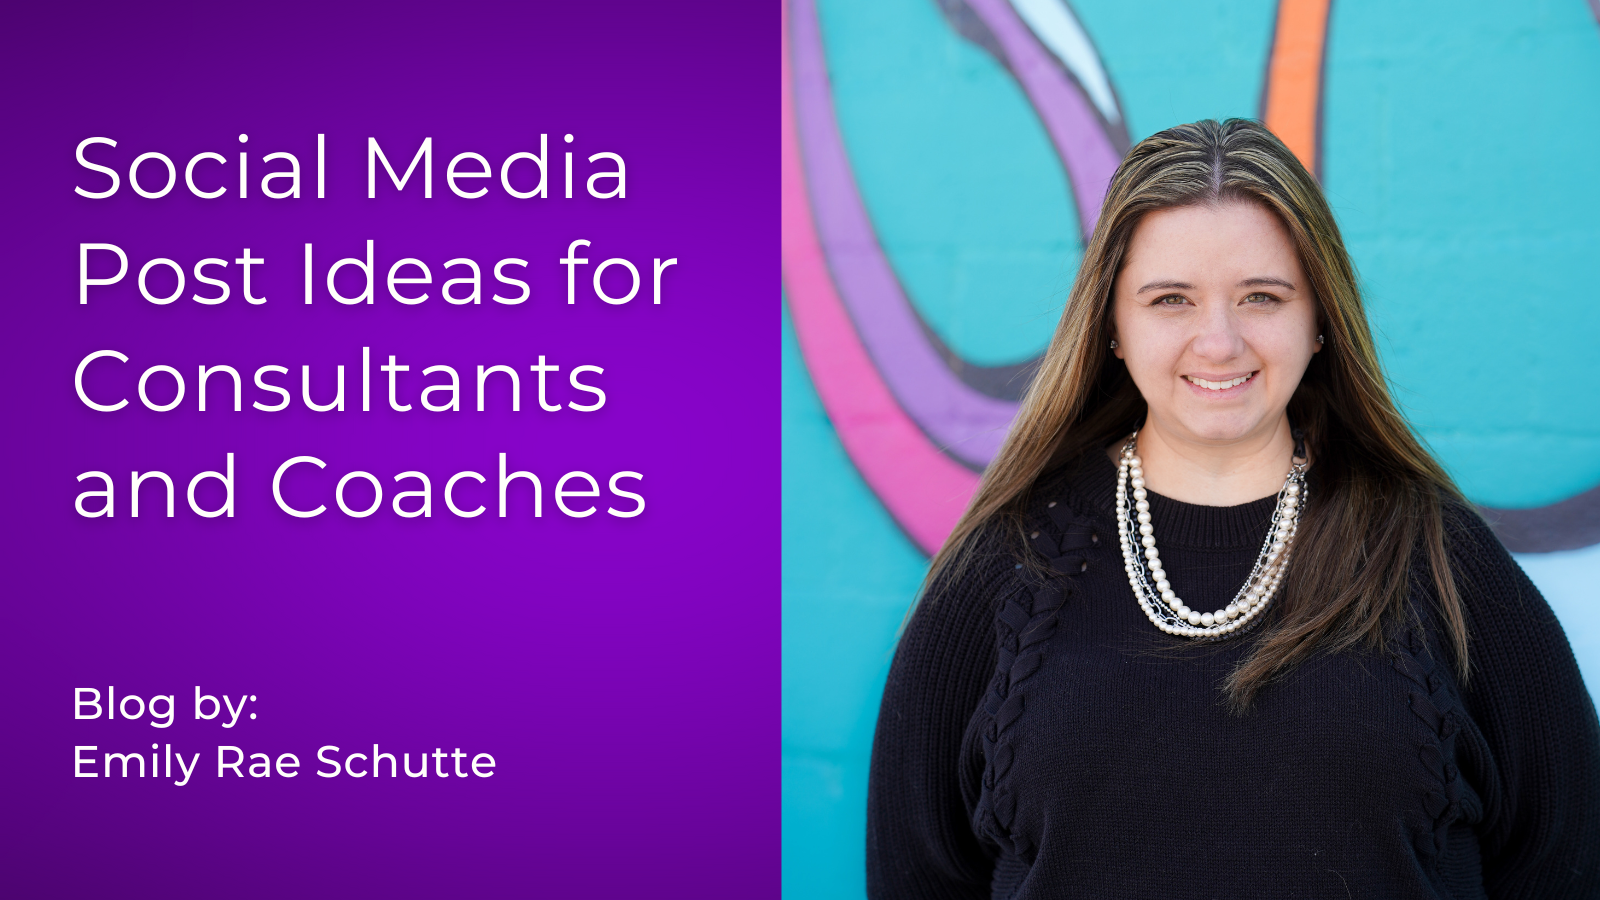 Social Media Post Ideas for Consultants and Coaches